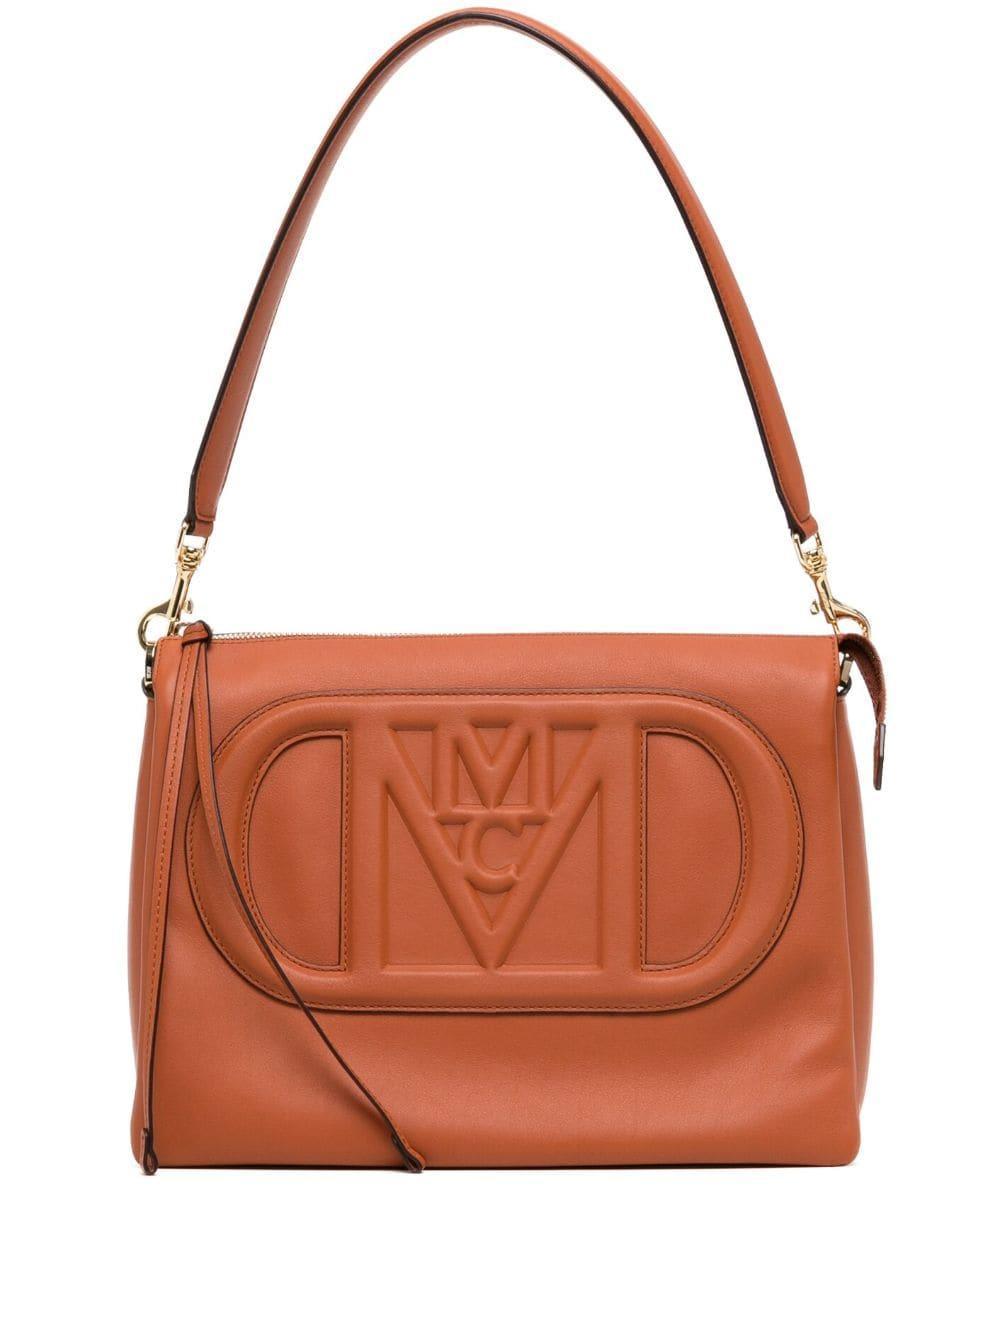 Handbags Mcm Brown Mode Travia Small Cross-body Bag with Gold Hardware